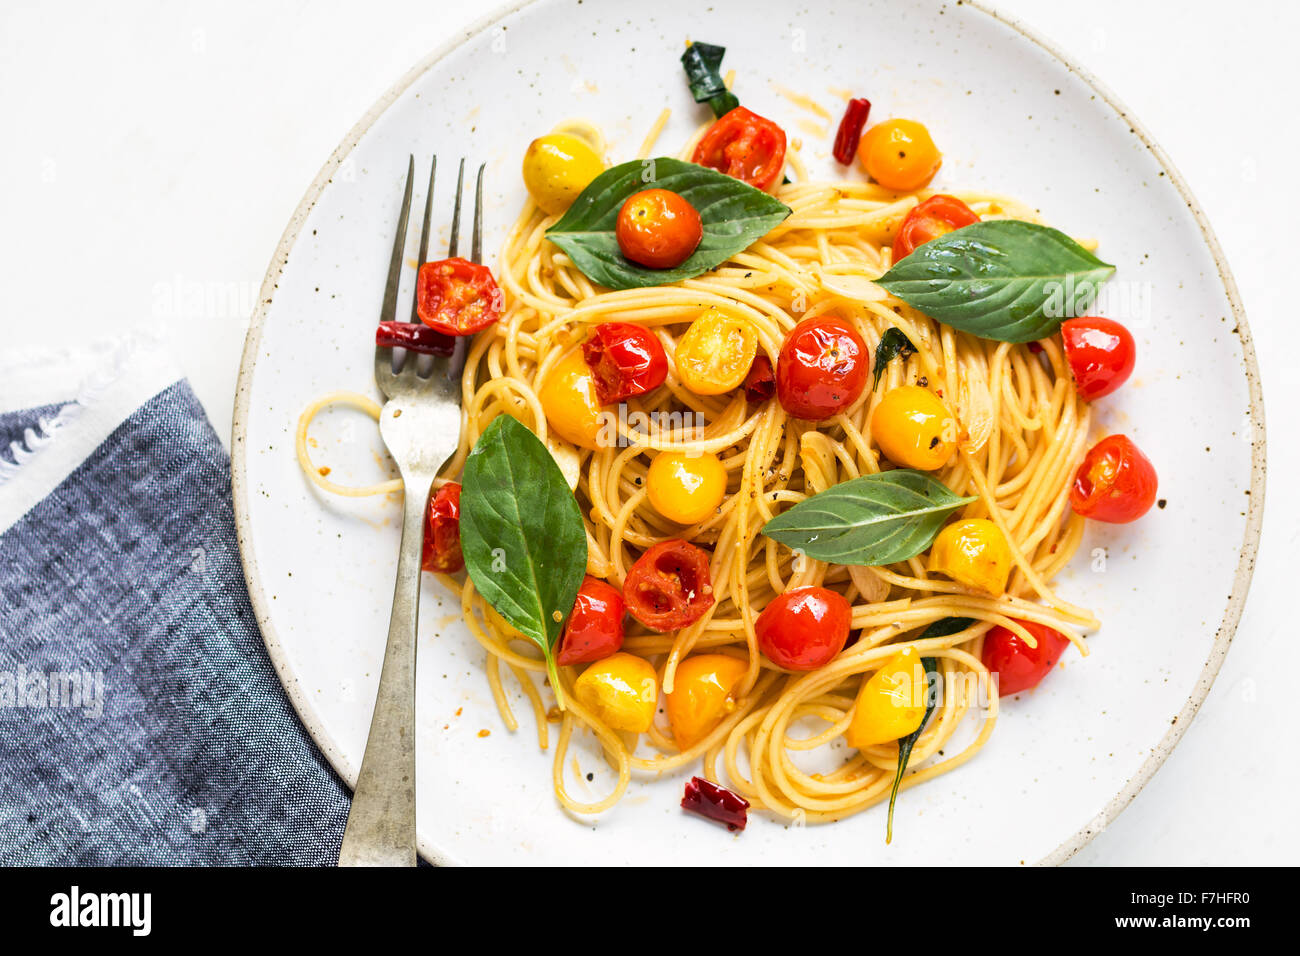 Spaghetti with red and yellow cherry tomato Stock Photo